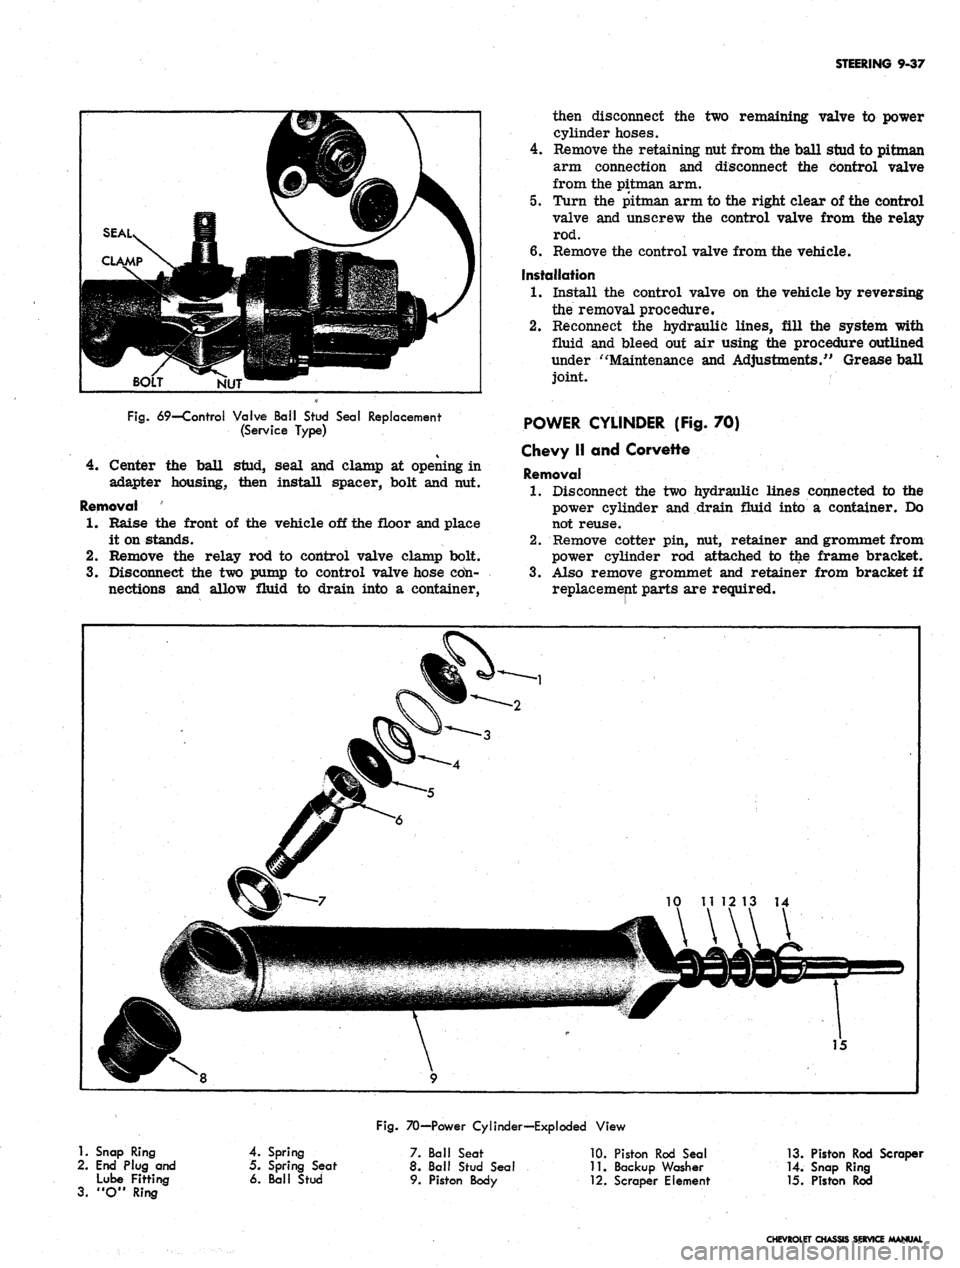 CHEVROLET CAMARO 1967 1.G Chassis Workshop Manual 
STEERING 9-37

NUT

Fig.
 69—Control Valve Ball Stud Seal Replacement

(Service Type)

4.
 Center the ball stud, seal and clamp at opening in

adapter housing, then install spacer, bolt and nut.

R